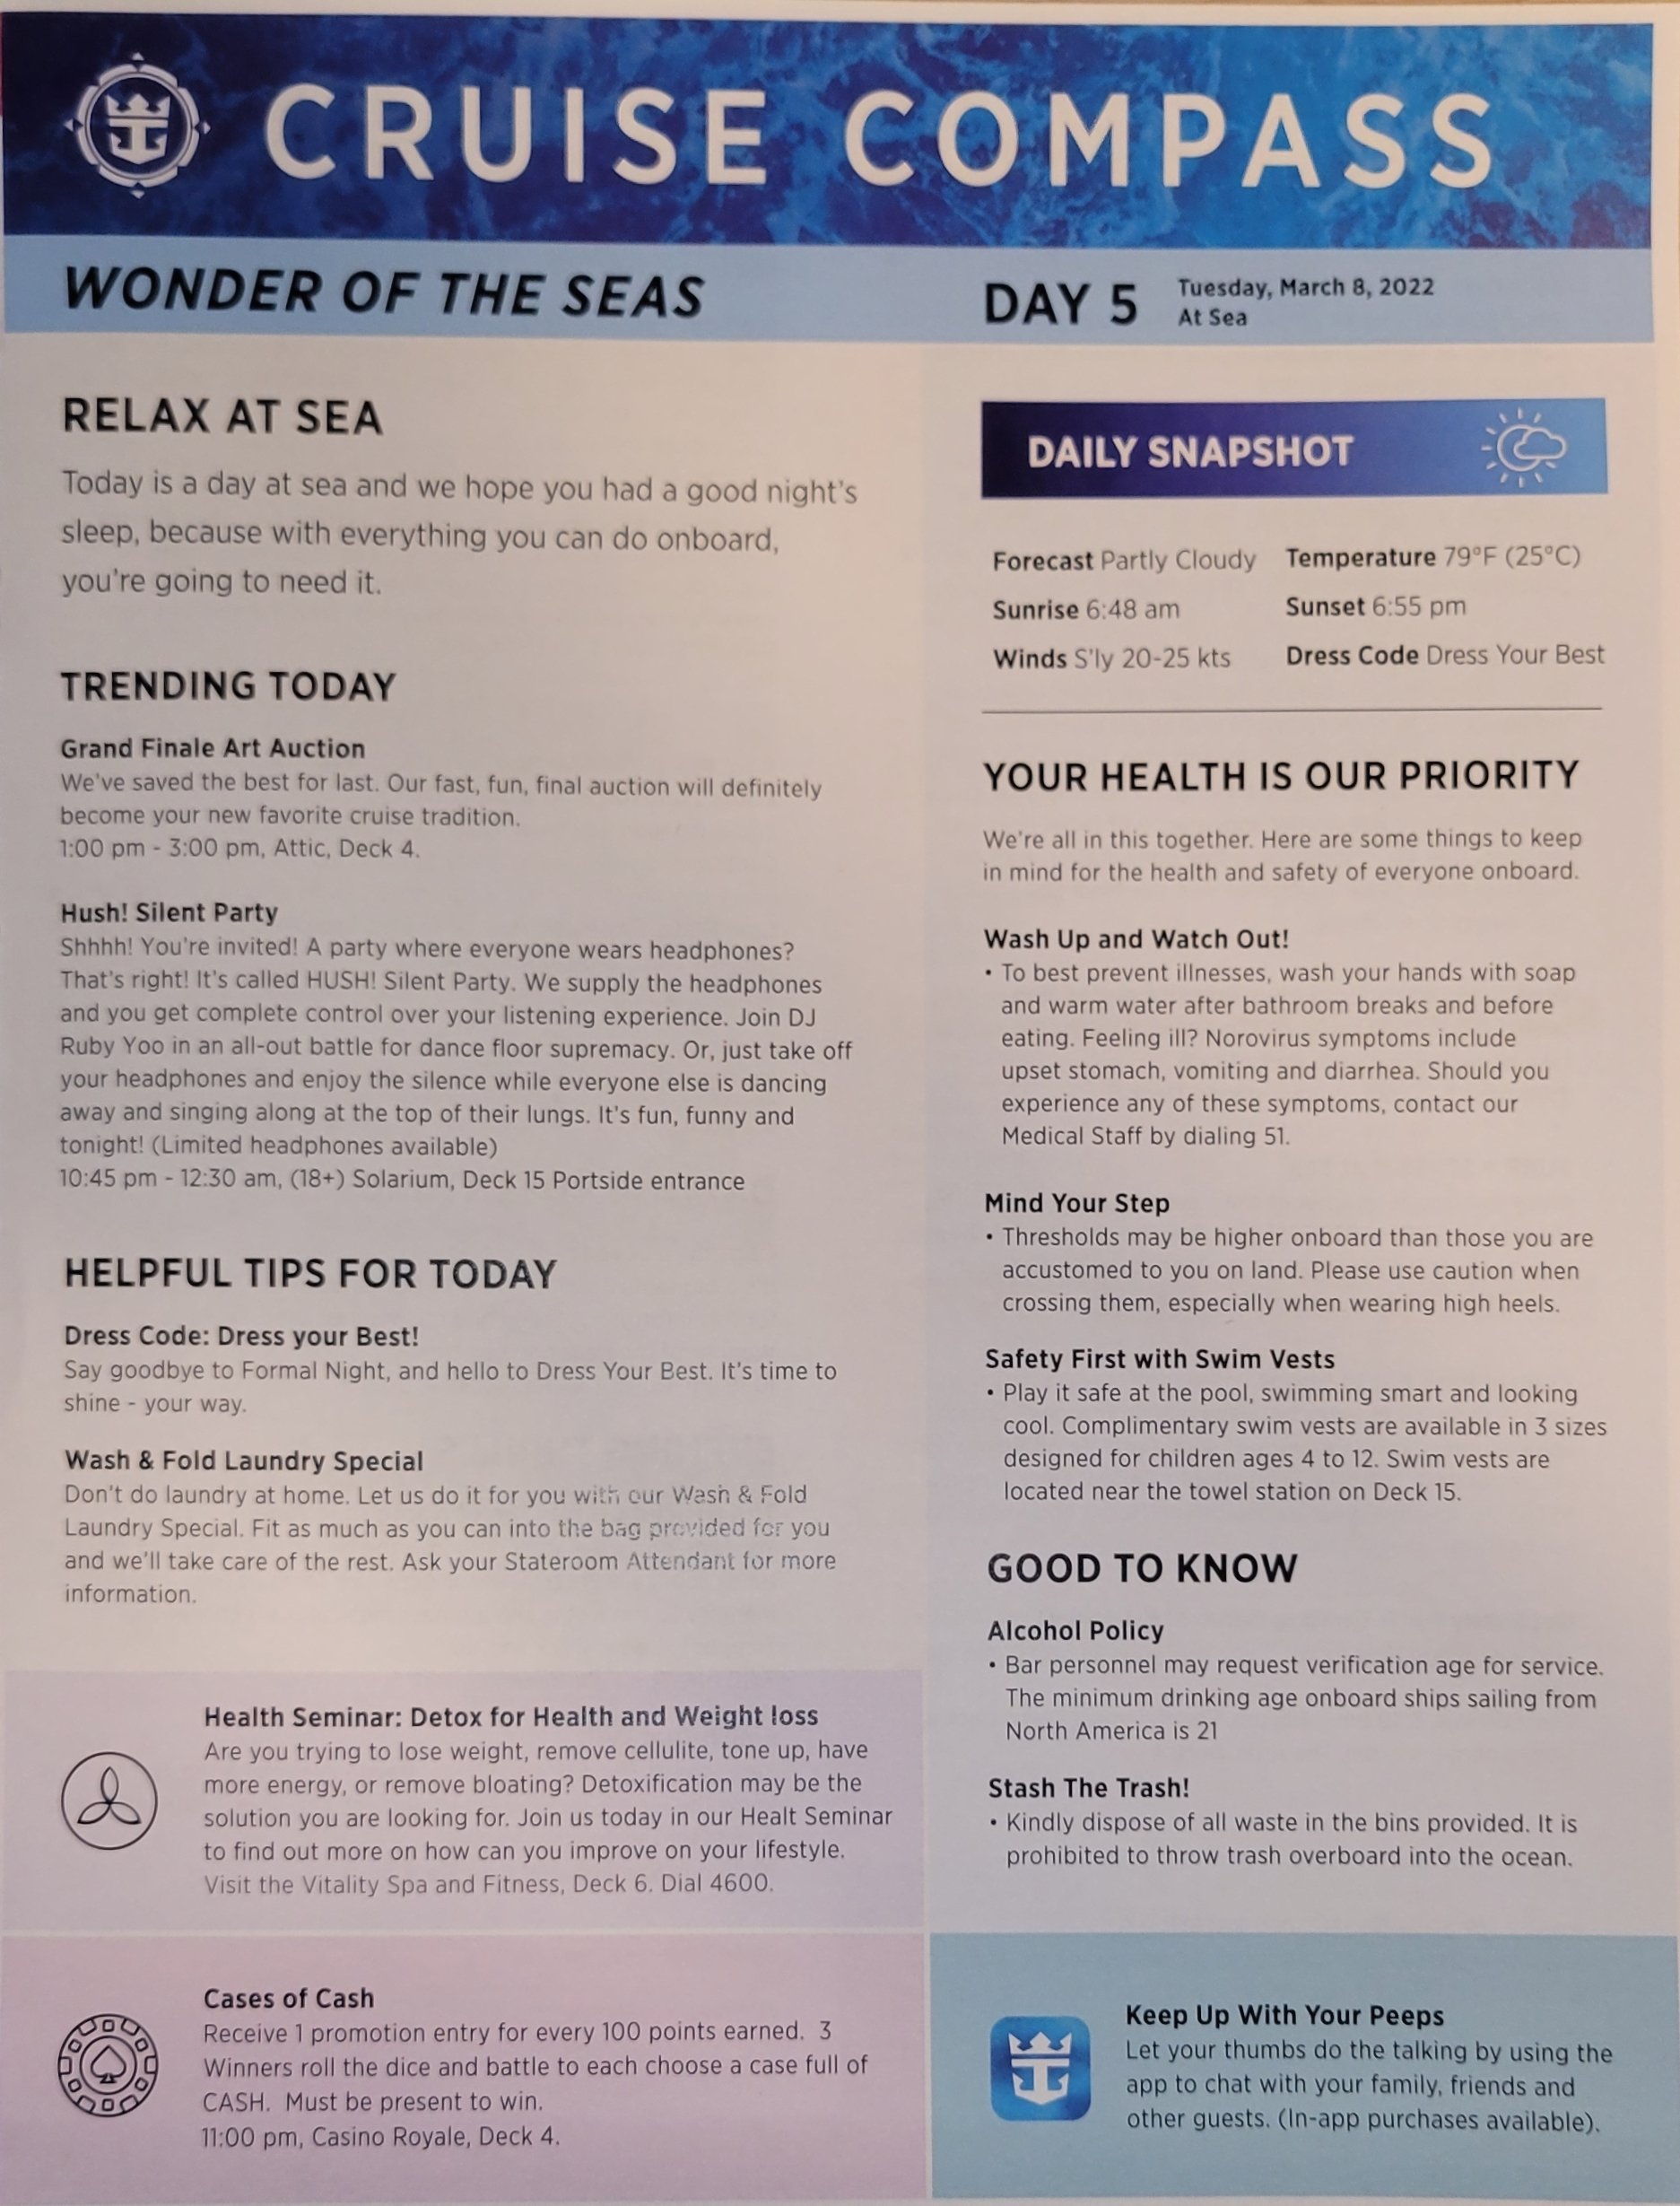 oasis of the seas cruise compass may 2022